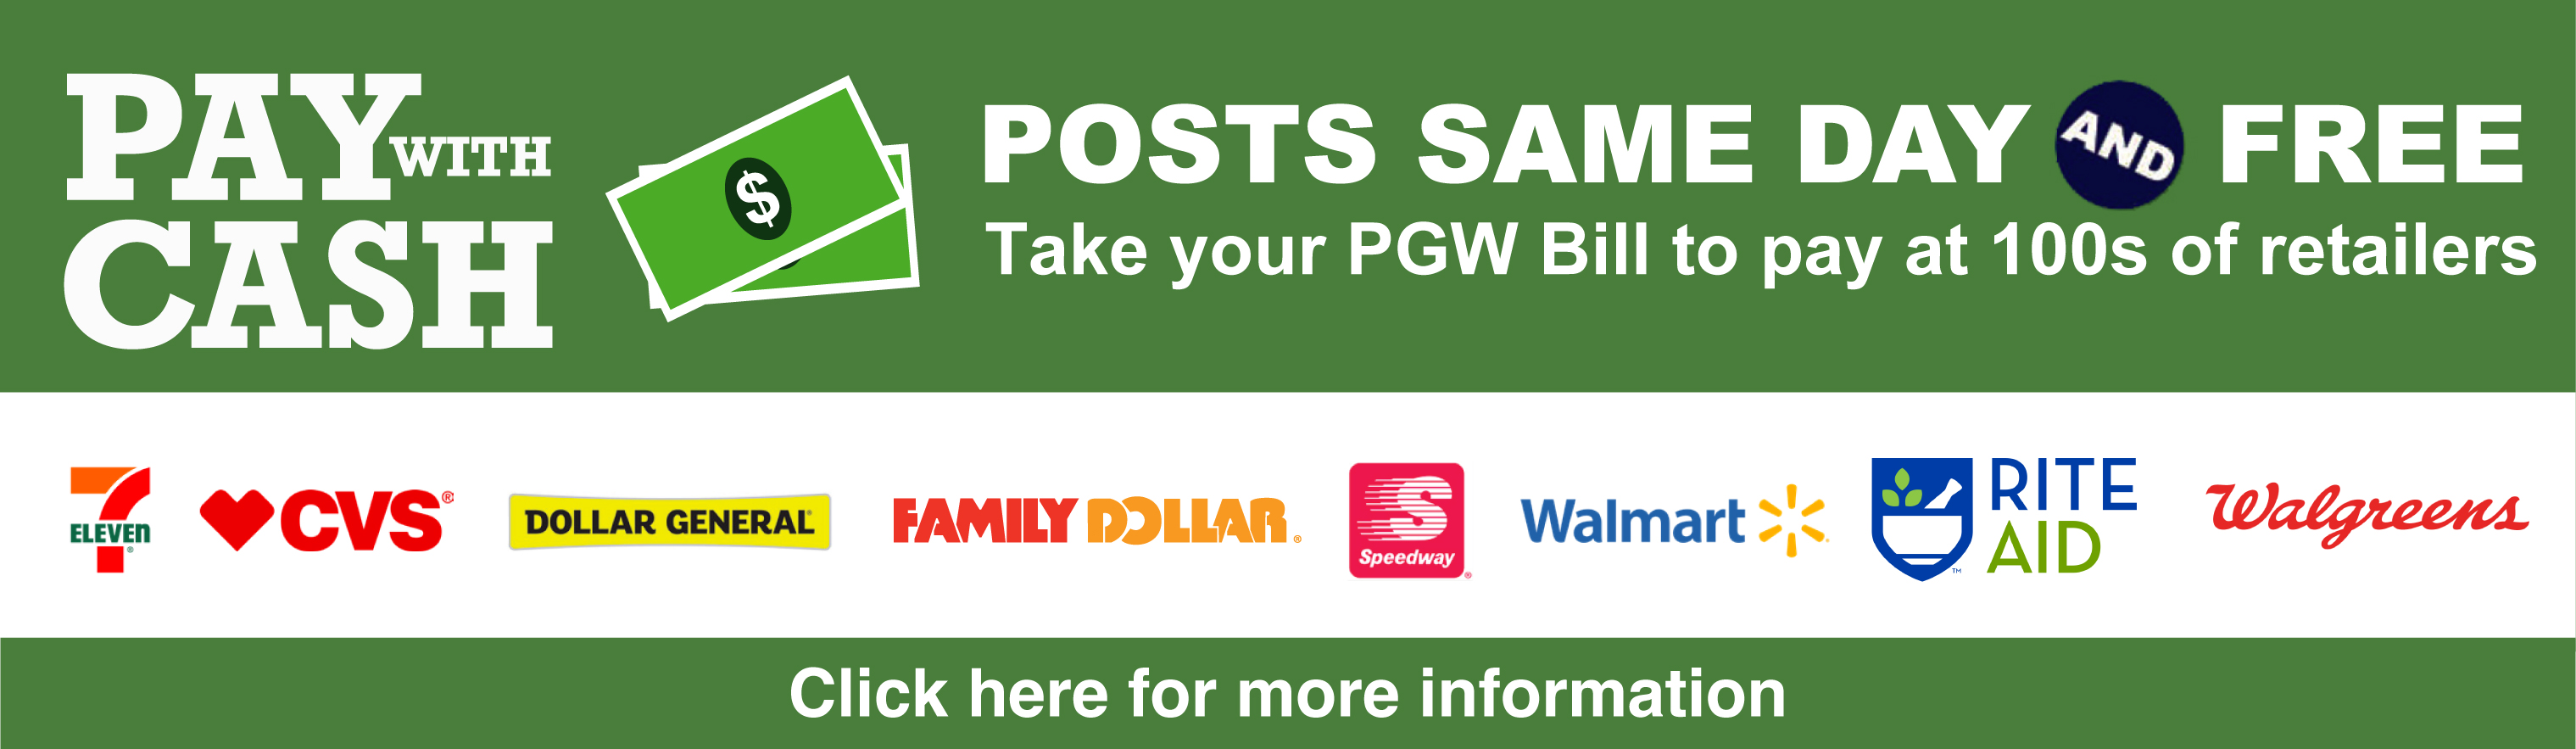 PGW Pay with cash image. Pay your PGW bill at hundreds of retailers